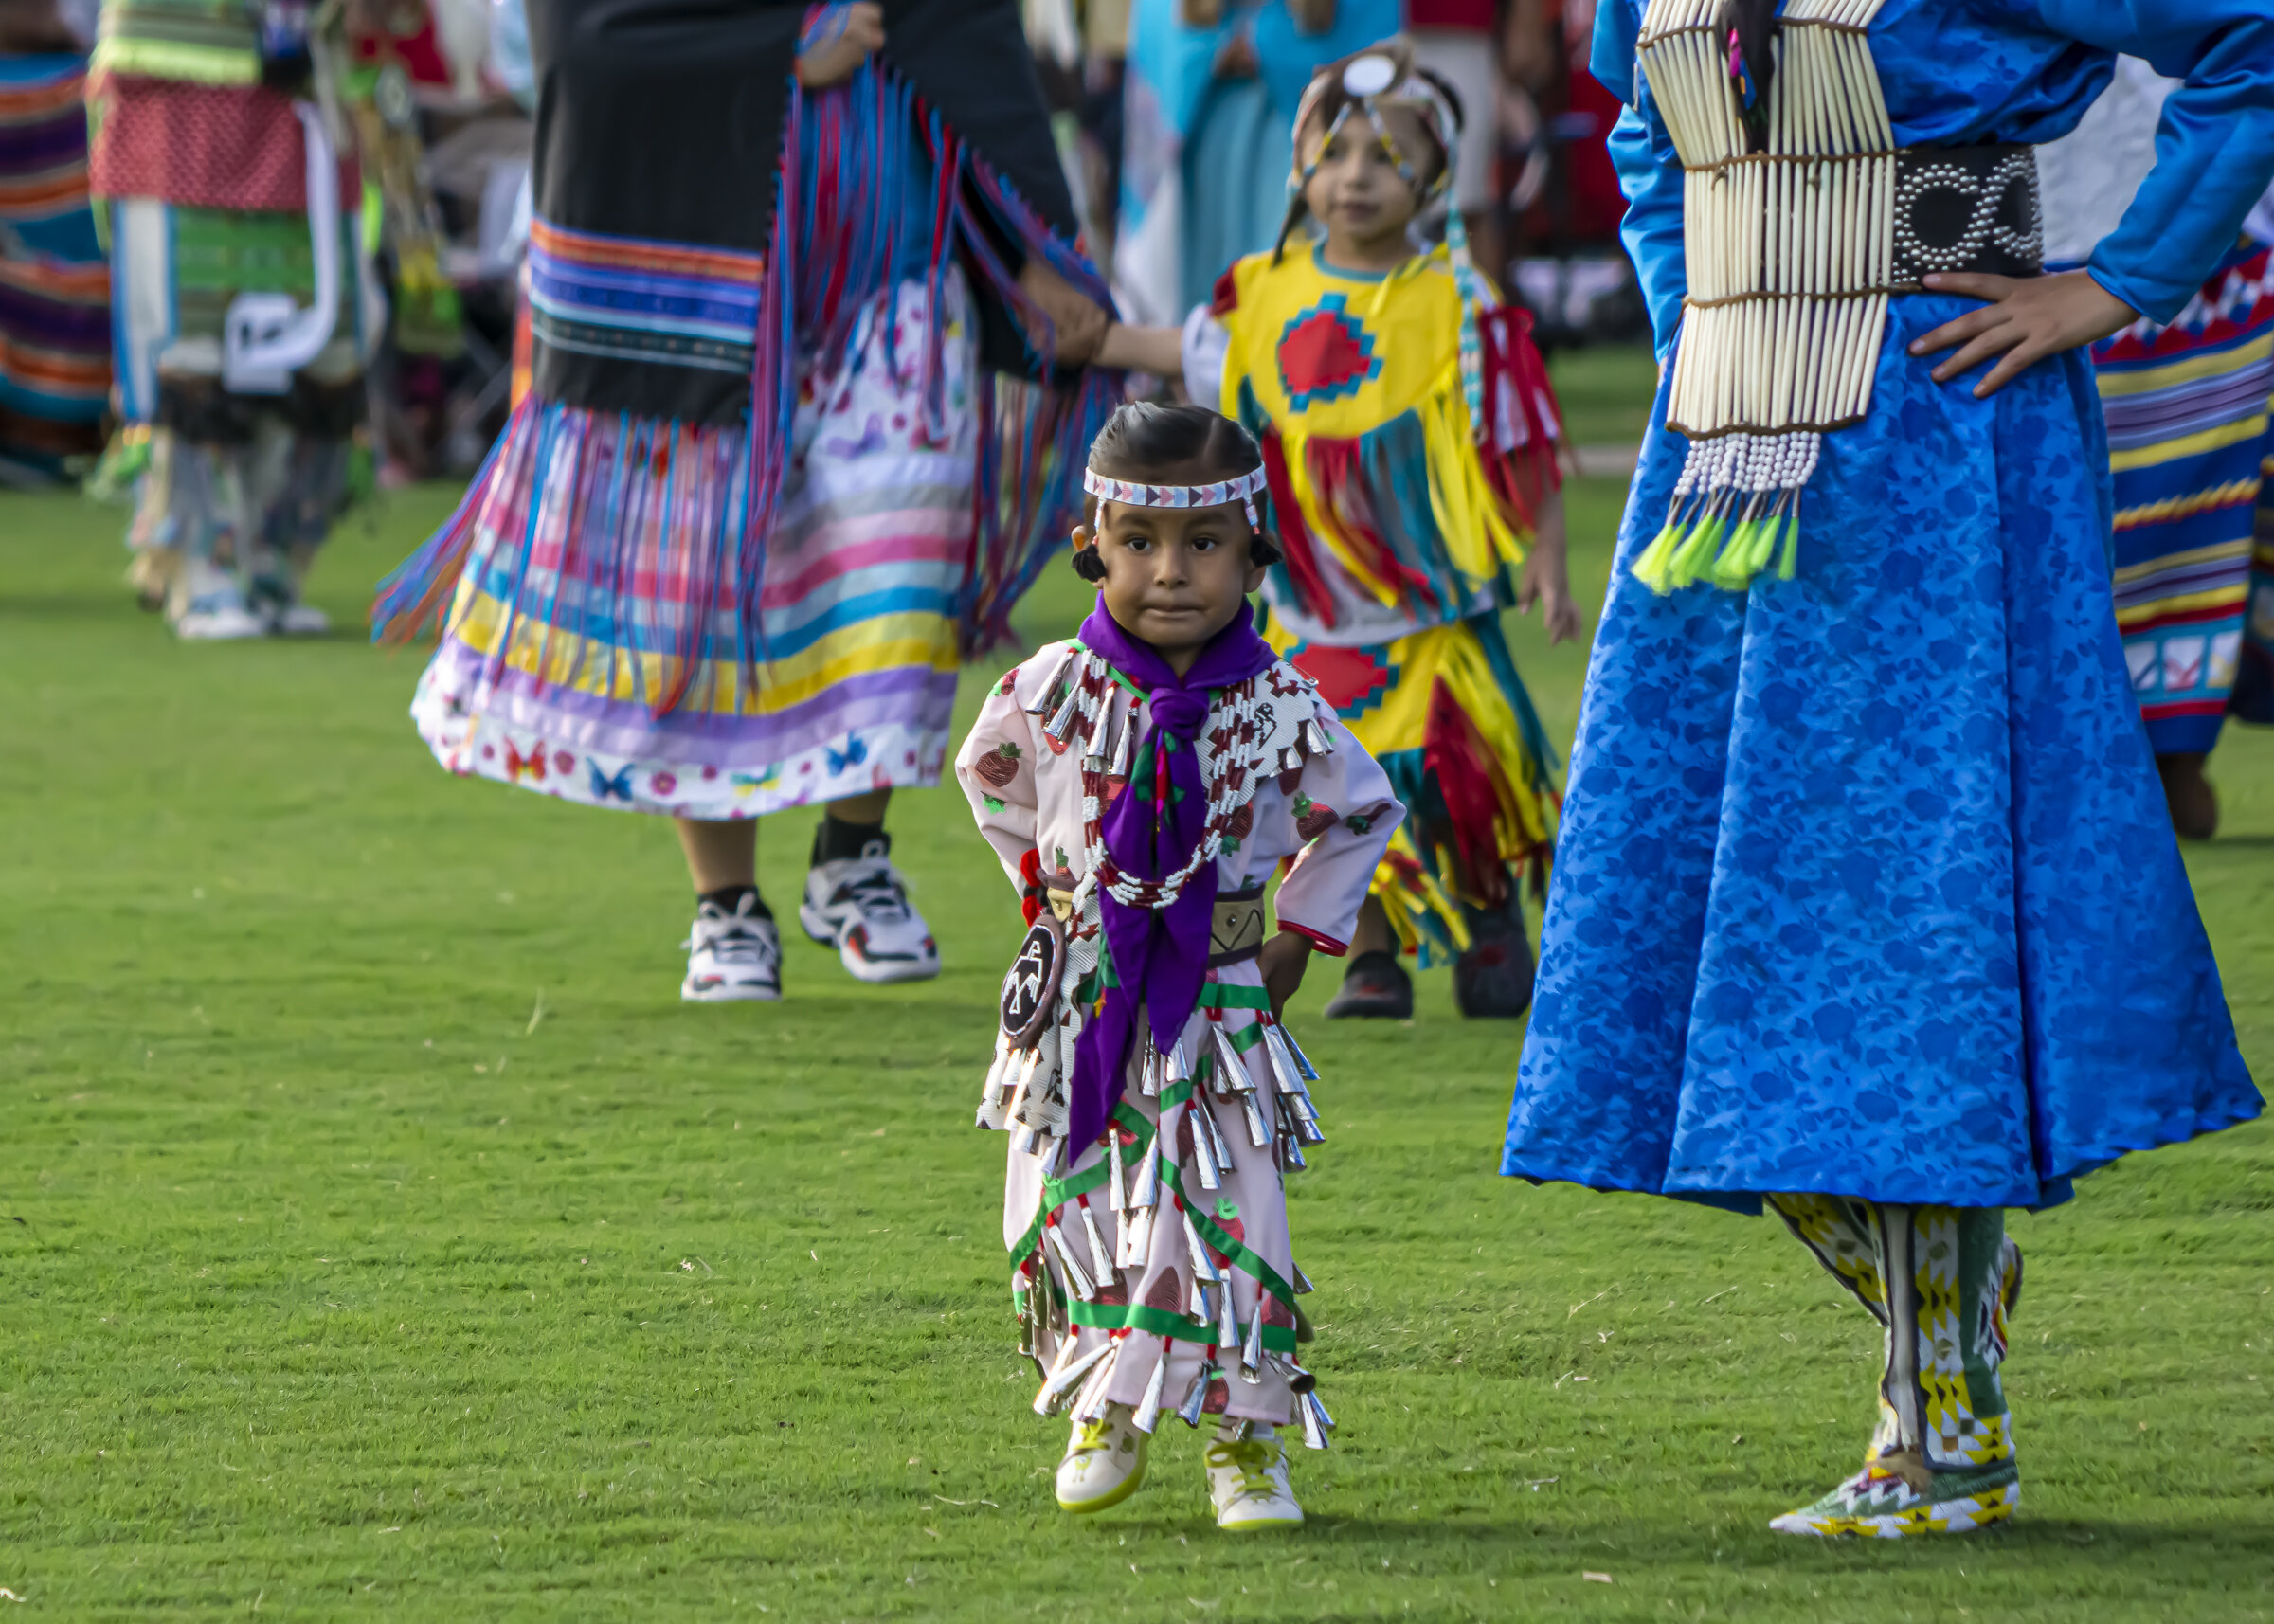 Mother Daughter Dance, Unite the People Powwow